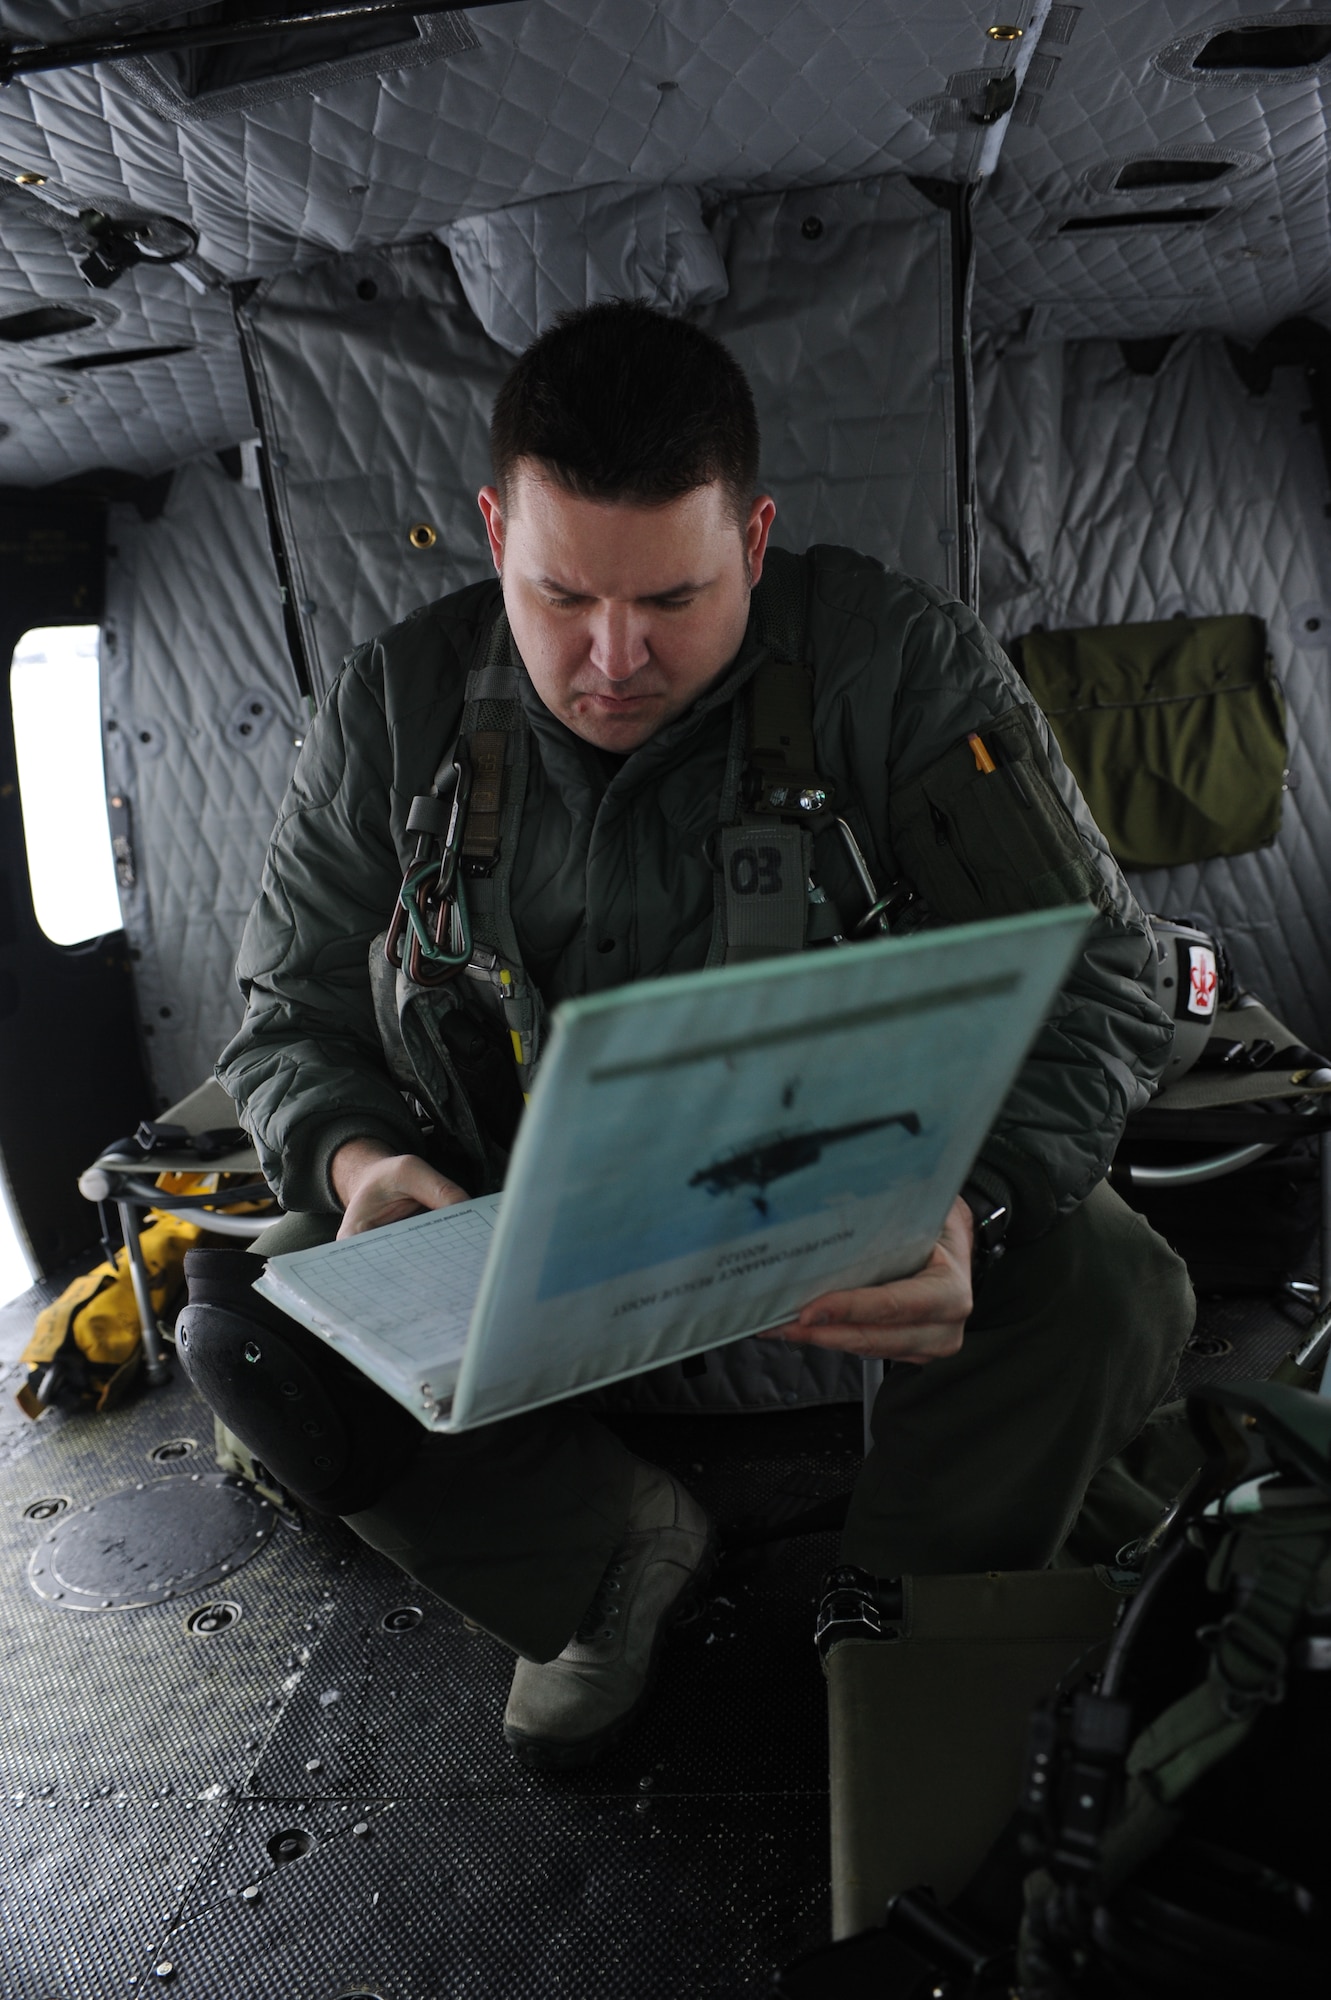 Master Sgt. Austin Atkinson, 54th Helicopter Squadron flight engineer, reviews a binder during preflight checks on a UH1-N helicopter on Minot Air Force Base, N.D., Feb. 11, 2015. During checks, Atkinson ensures that everything from the propellers to the engines were flight-ready. (U.S. Air Force photos/Senior Airman Stephanie Morris)